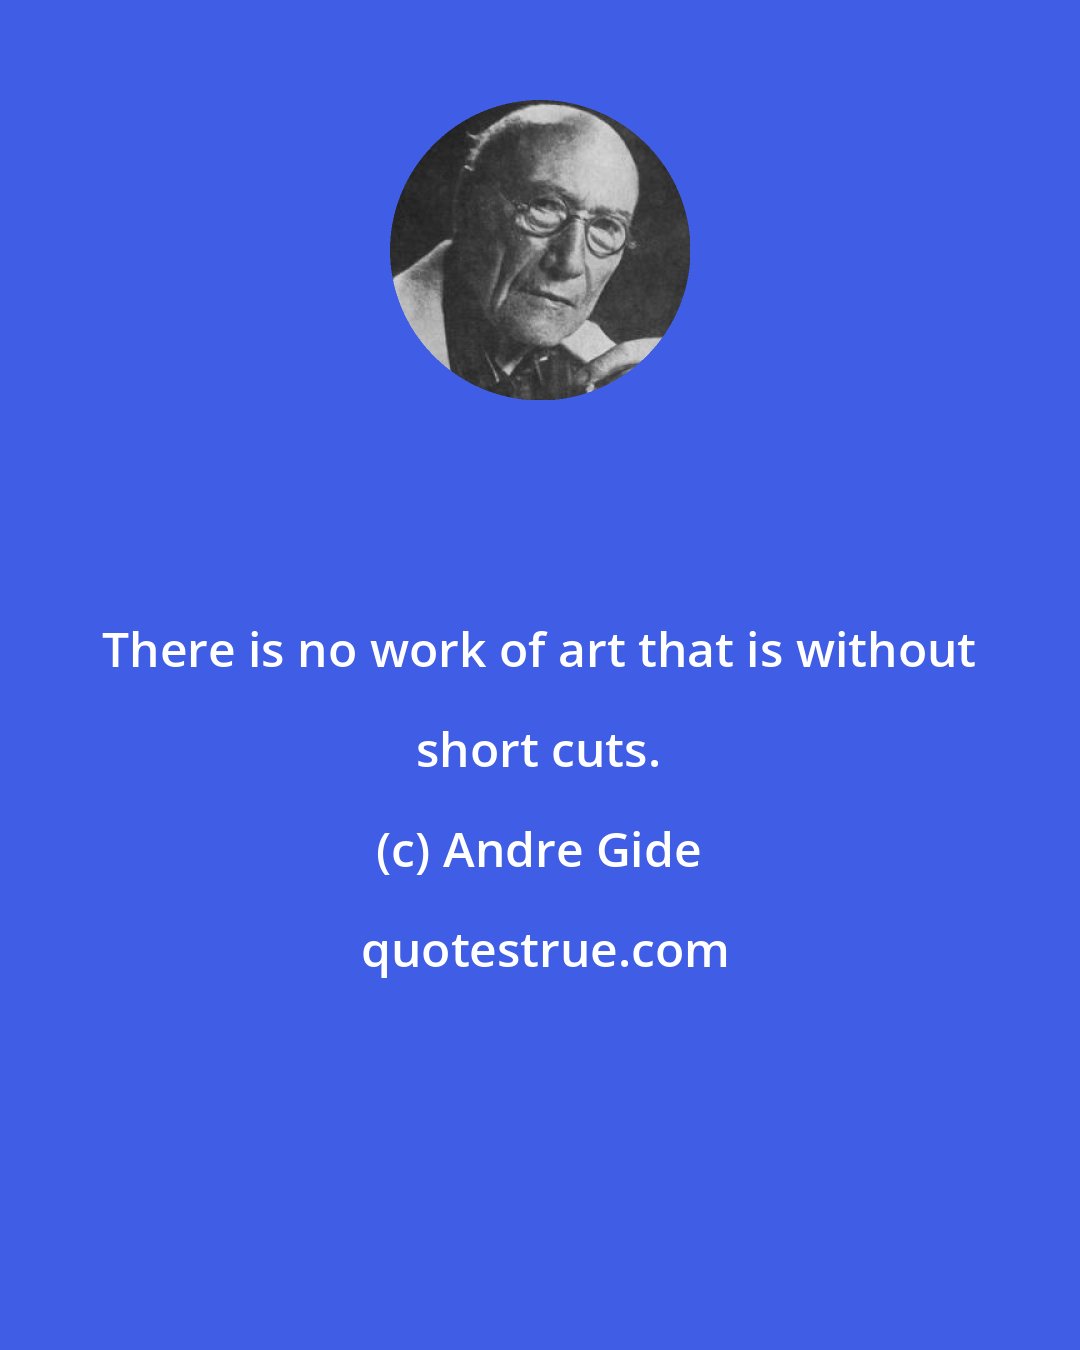 Andre Gide: There is no work of art that is without short cuts.